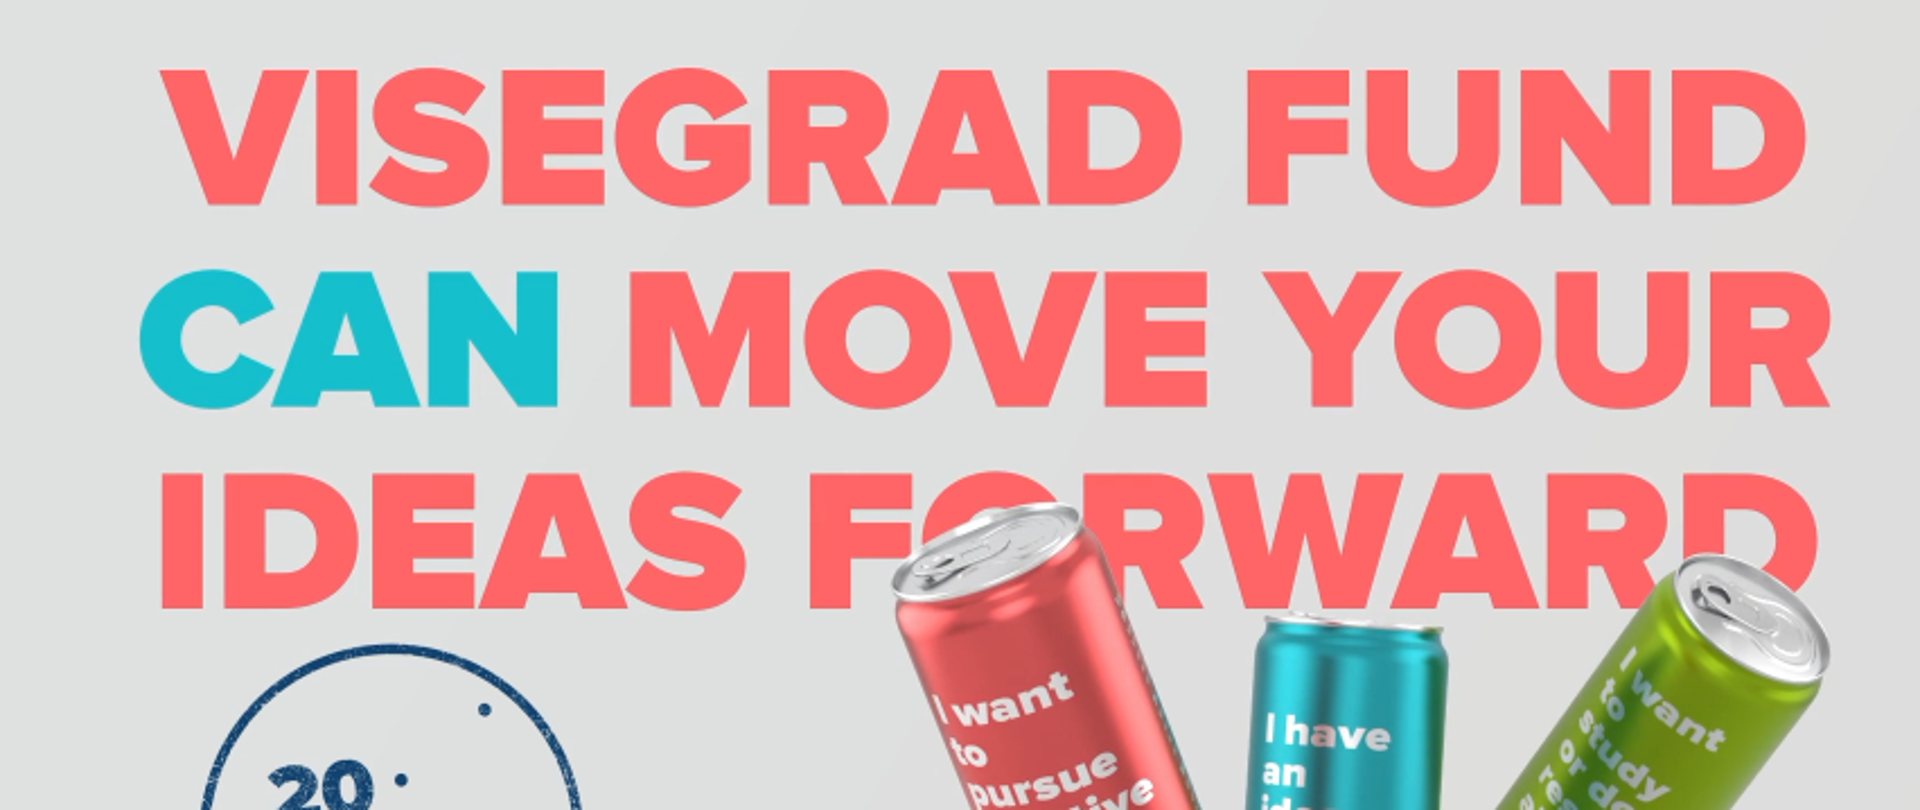 VISEGRAD FUND CAN MOVE YOUR IDEAS FORWARD